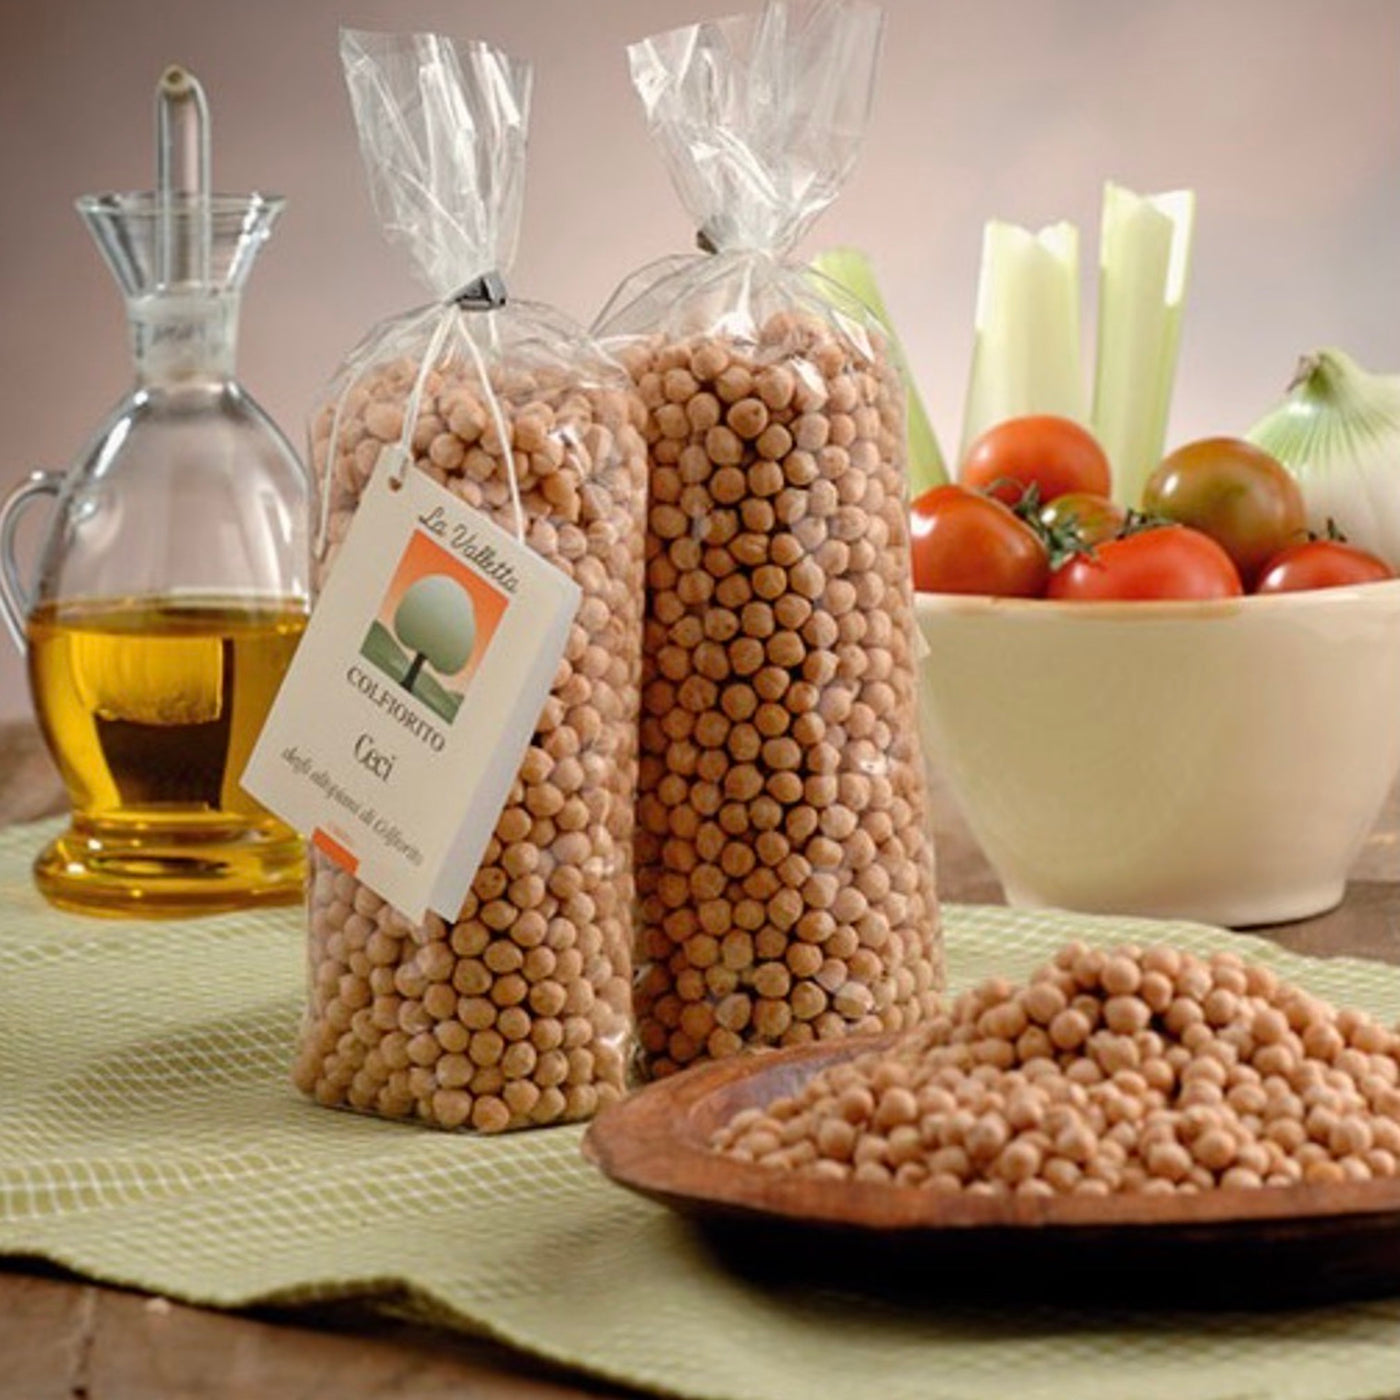 chick-peas-la-valetta-italy-online-grocery-delivery-singapore-thenewgrocer